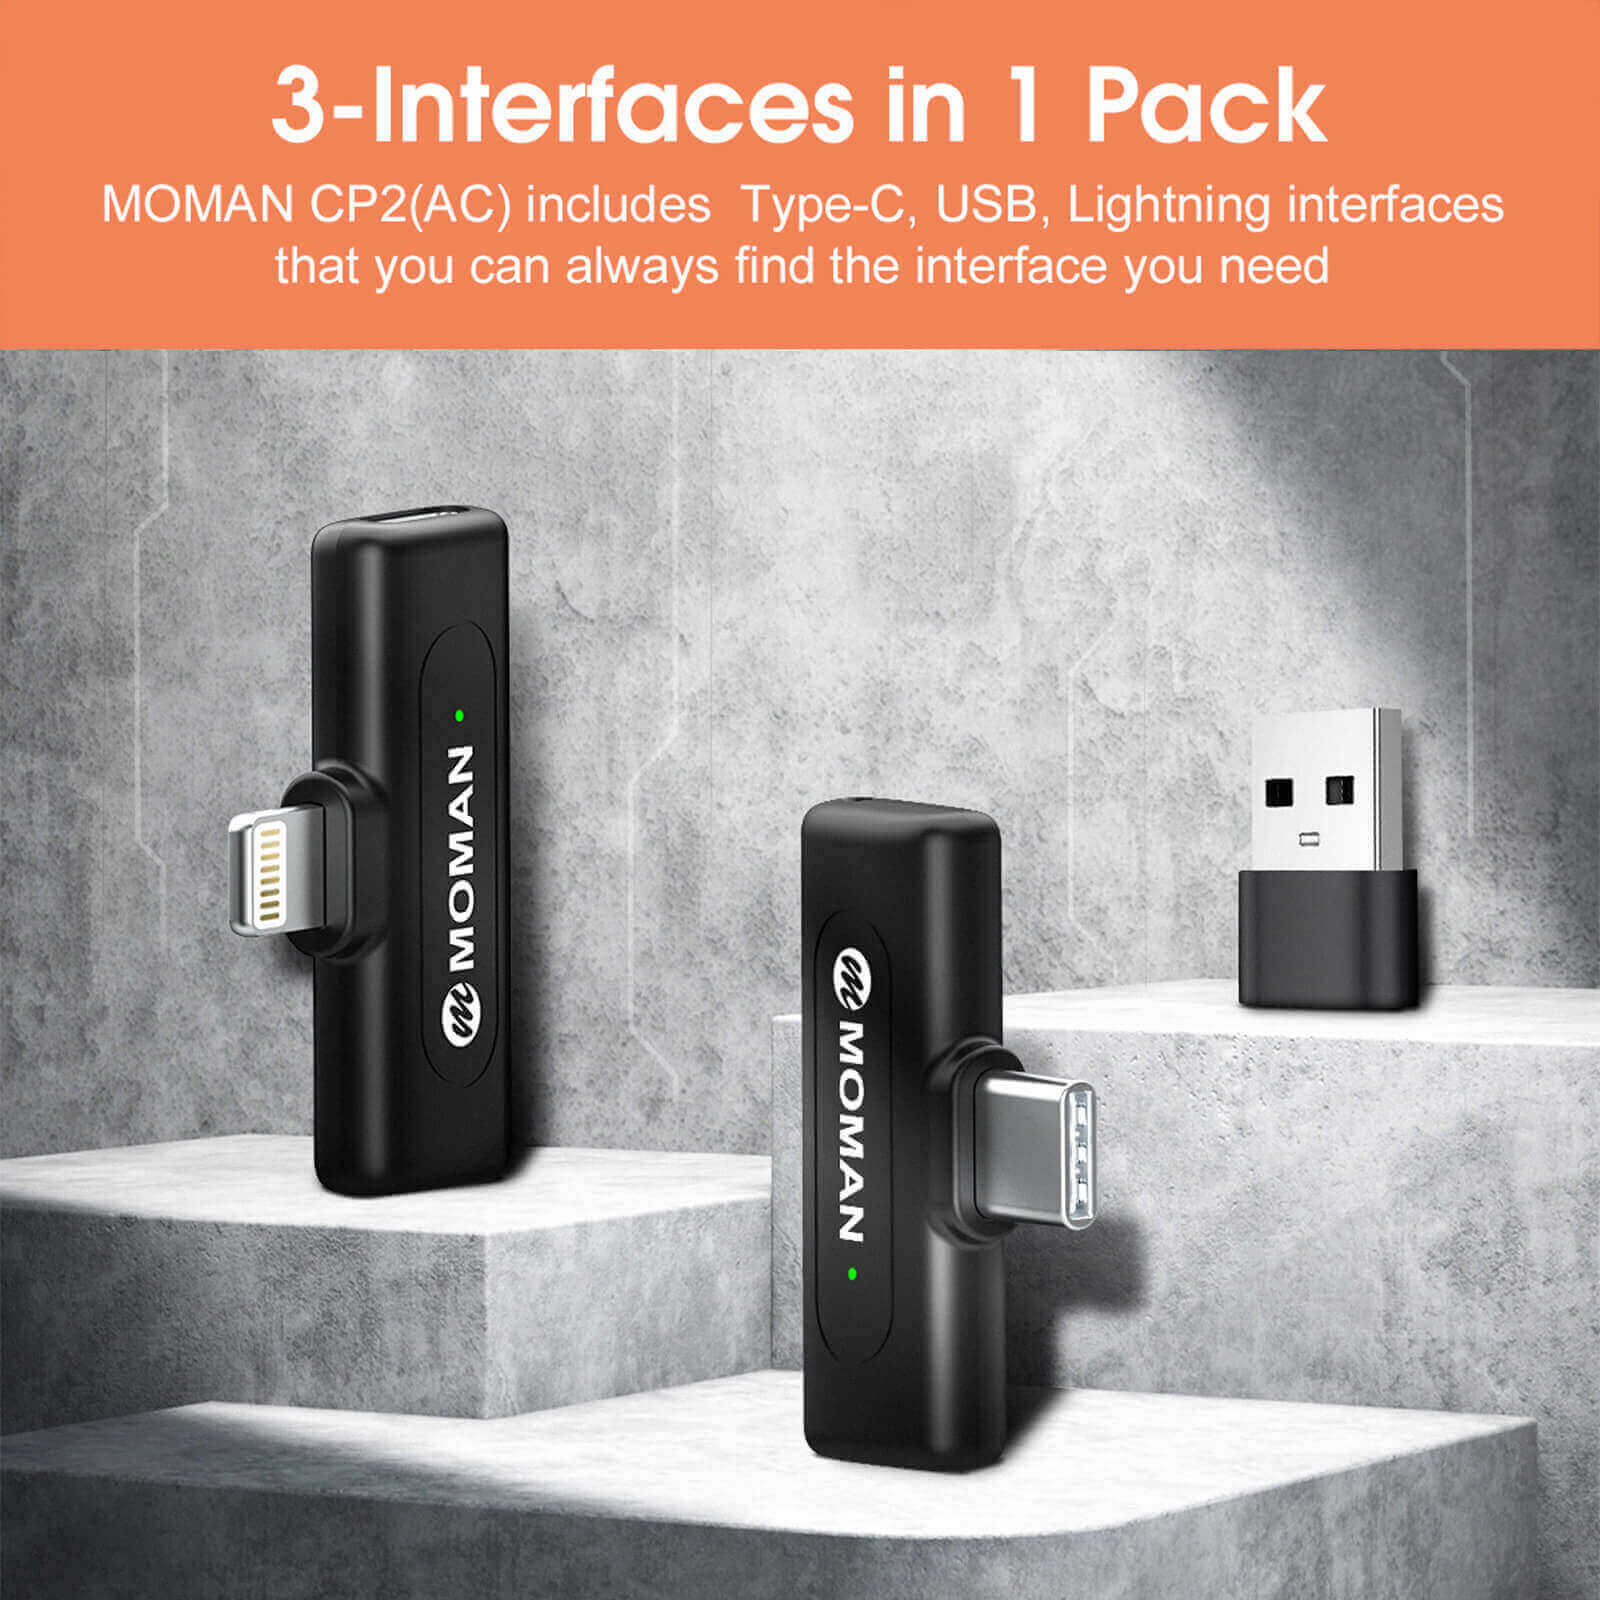 Moman CP2(AC) with 3-interfaces in 1 pack to suit your specific needs